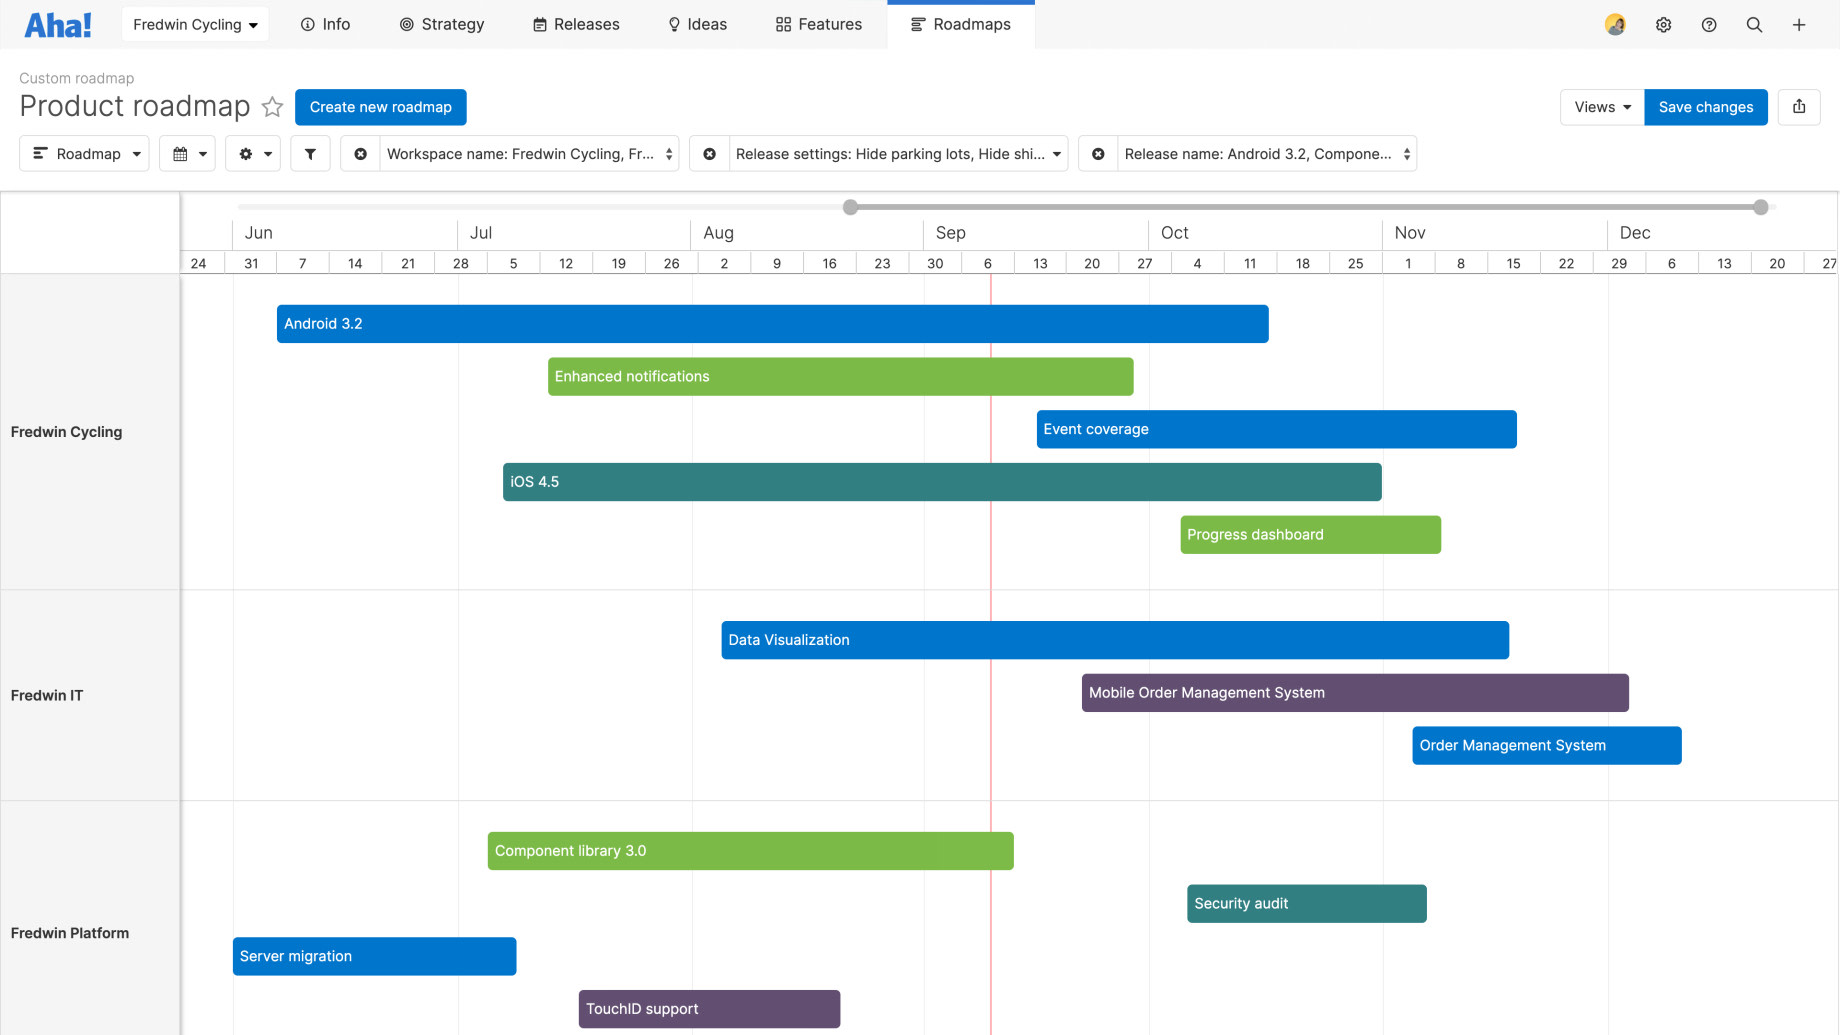 Custom product roadmap comparing multiple products